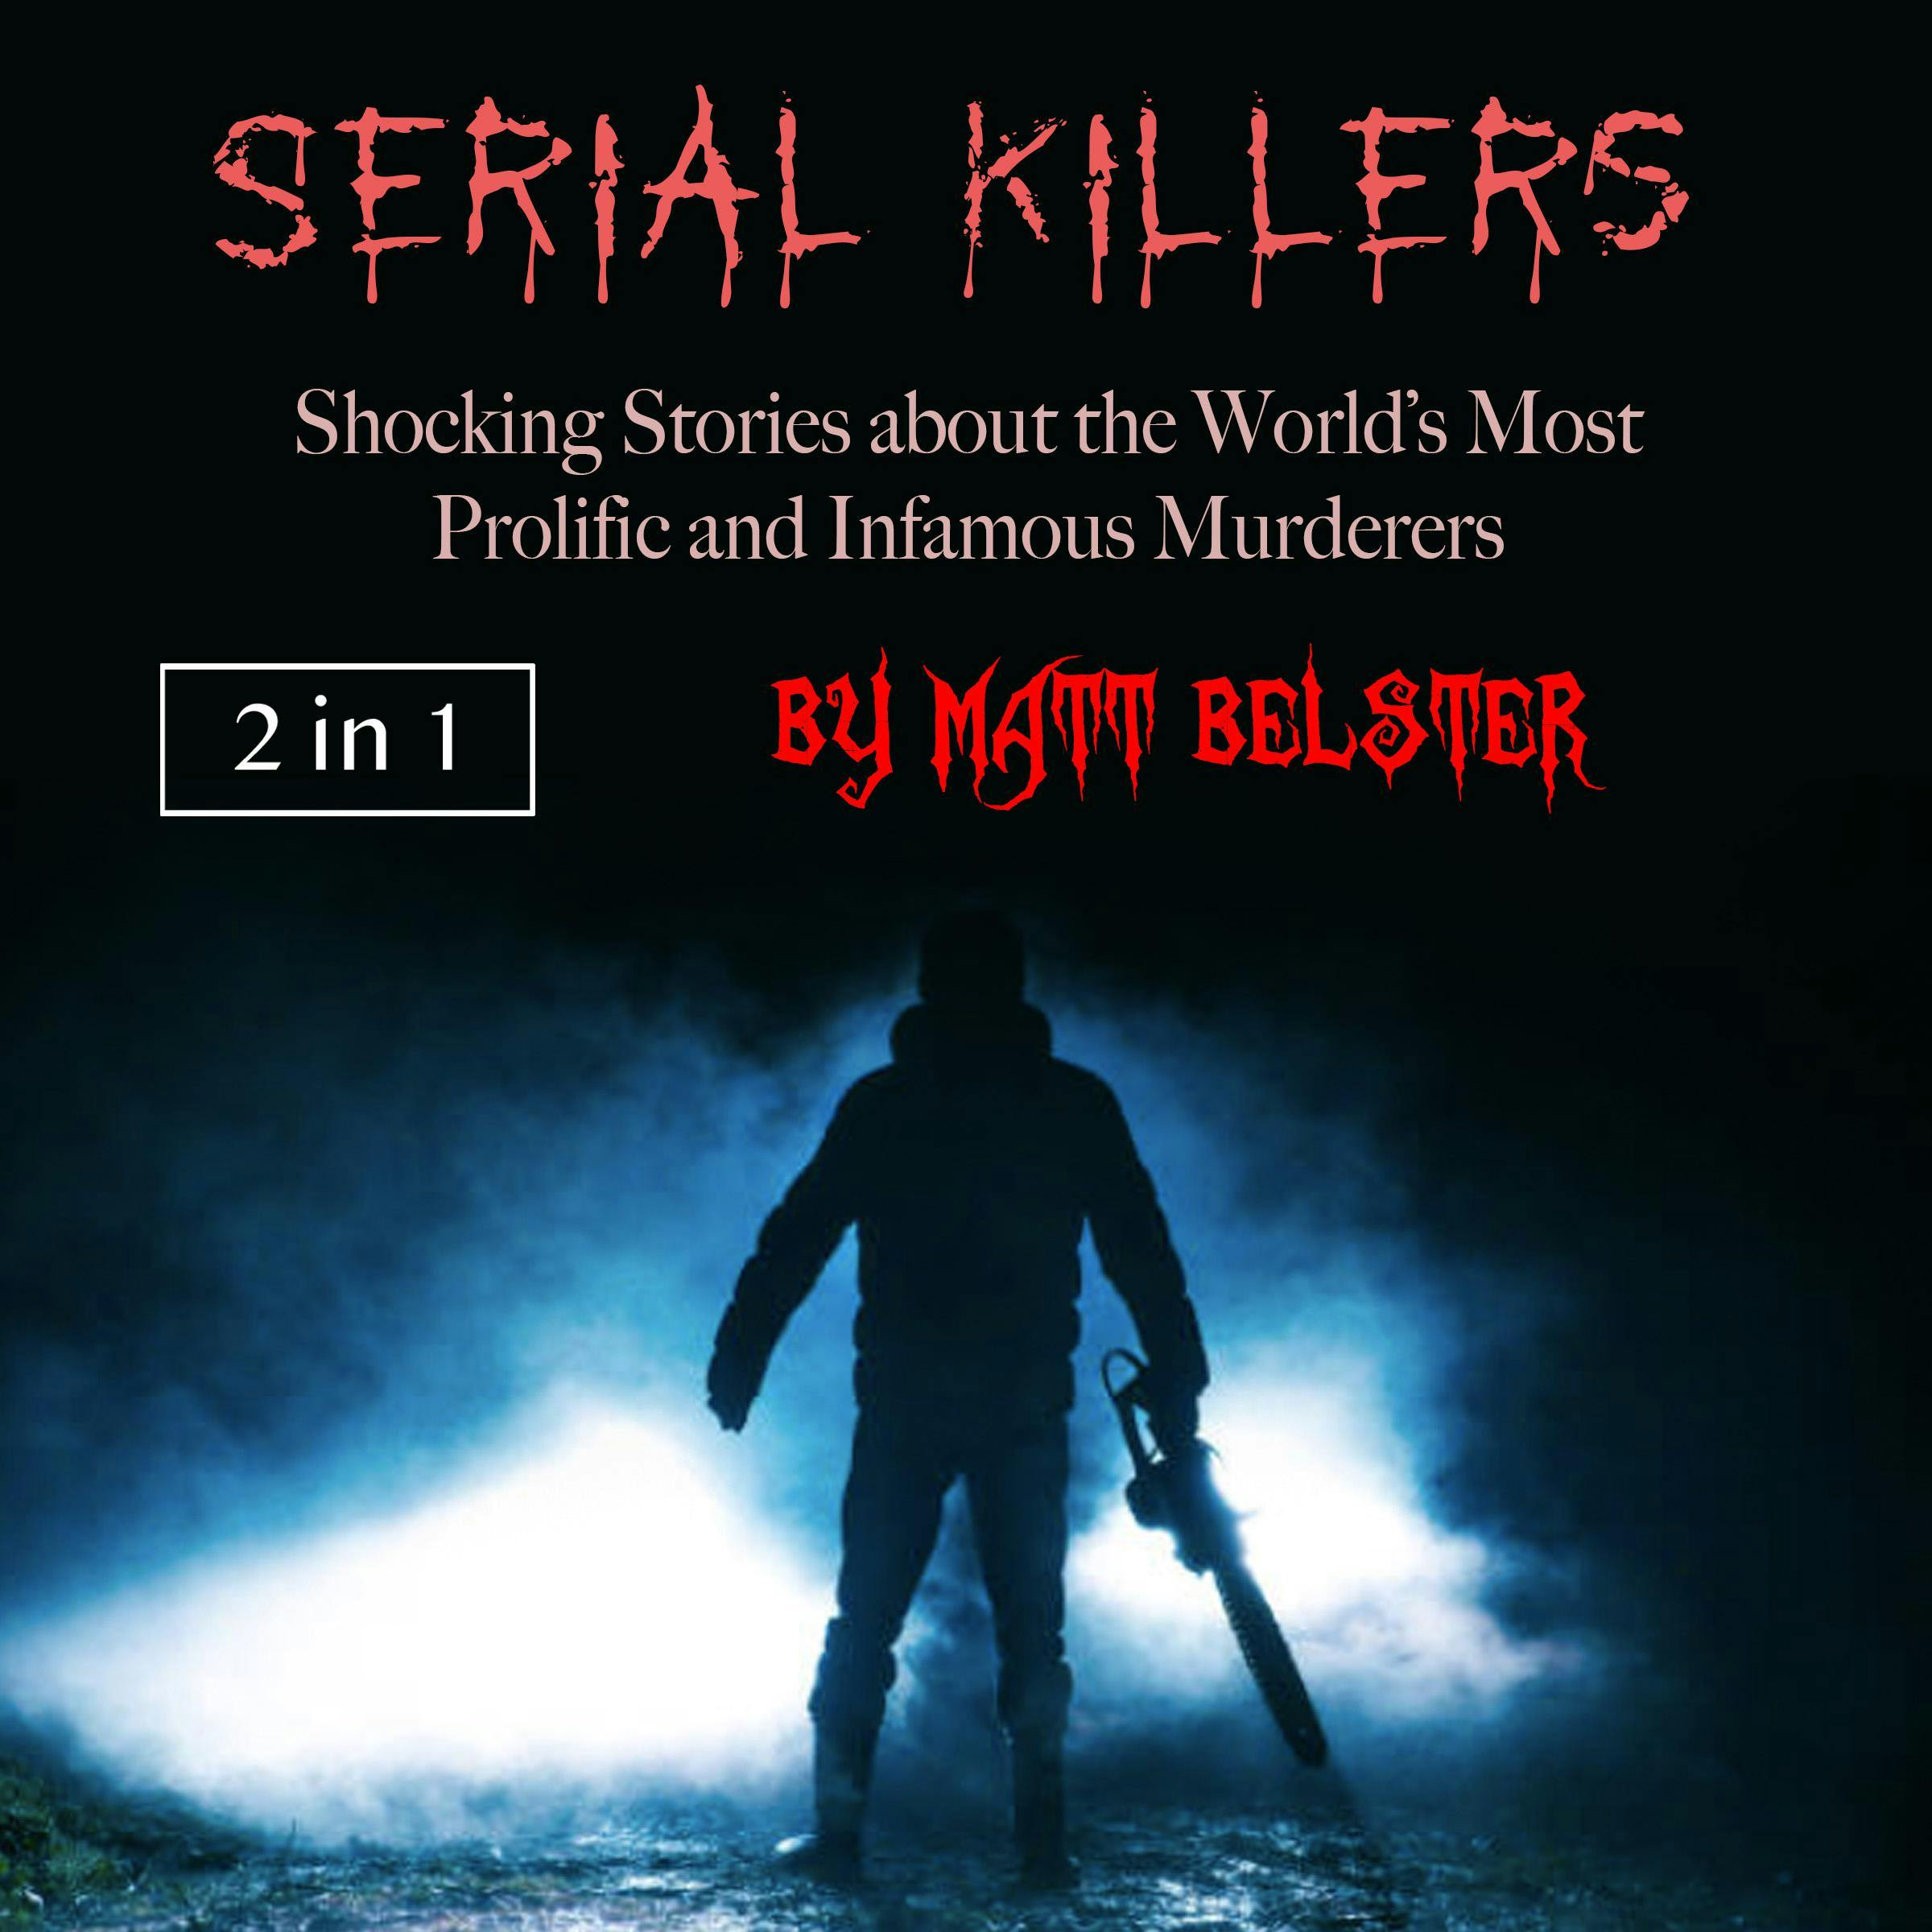 Serial Killers: Shocking Stories about the World’s Most Prolific and Infamous Murderers - undefined